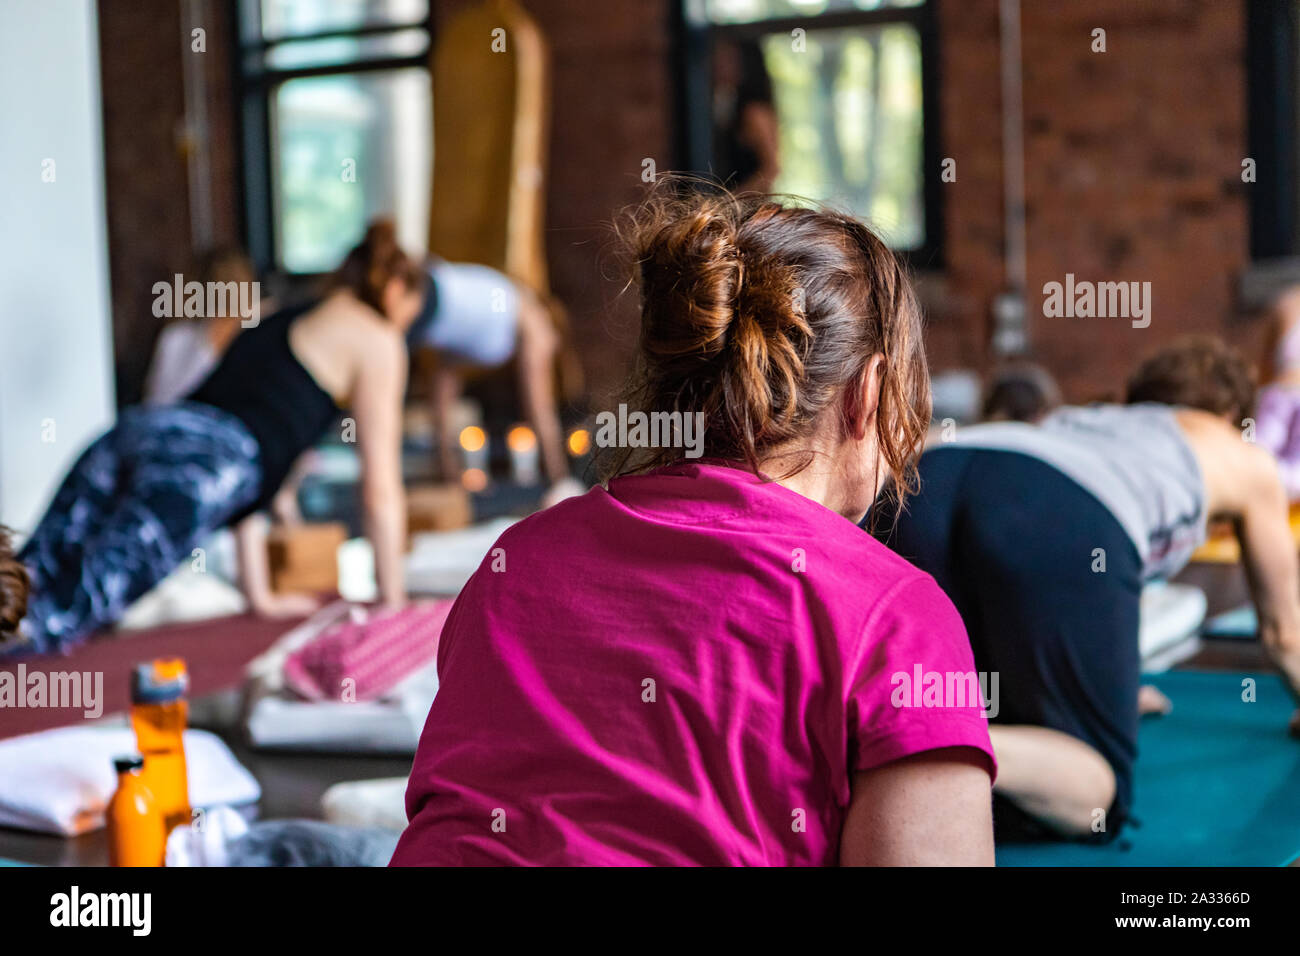 A closeup and rear view of a lady wearing a pink shirt with brunette hair tied back during a calming yogic class practicing a traditional routine of postures. Stock Photo